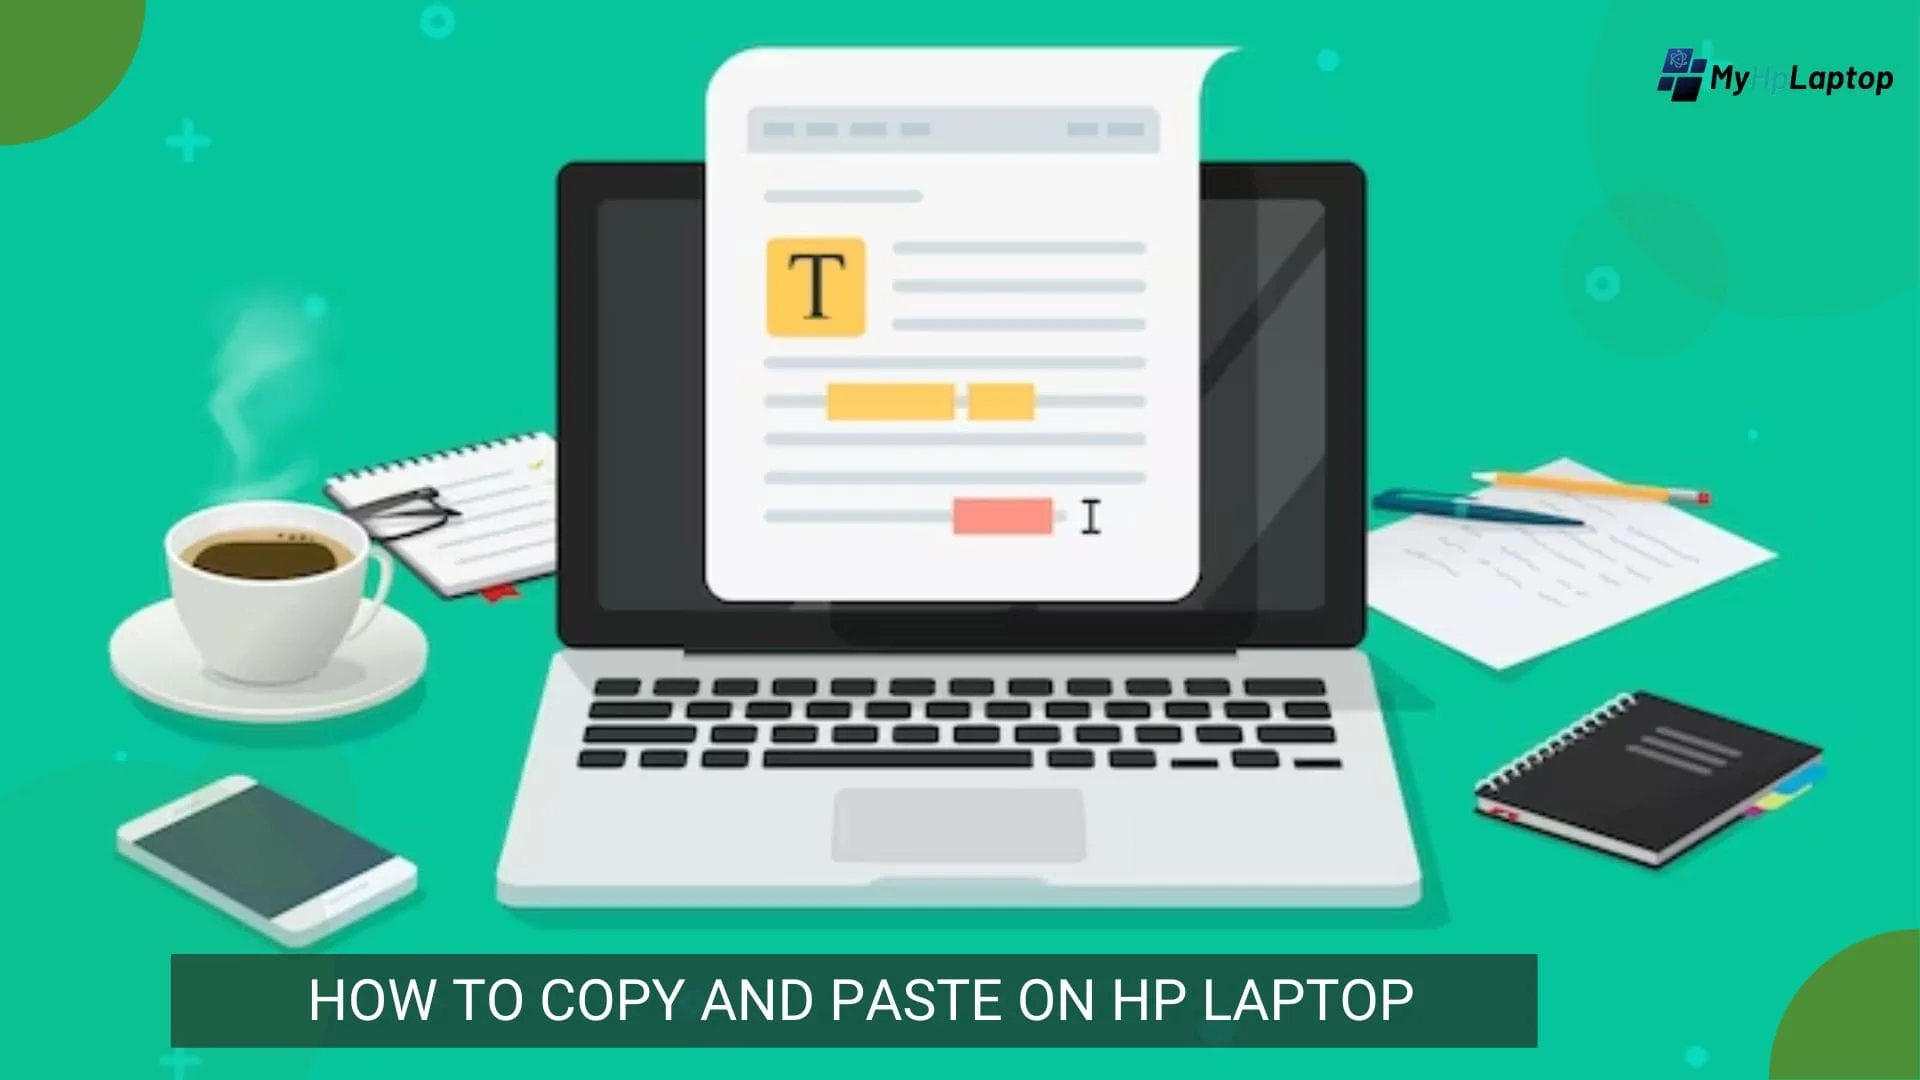 How to Copy and Paste on HP Laptop